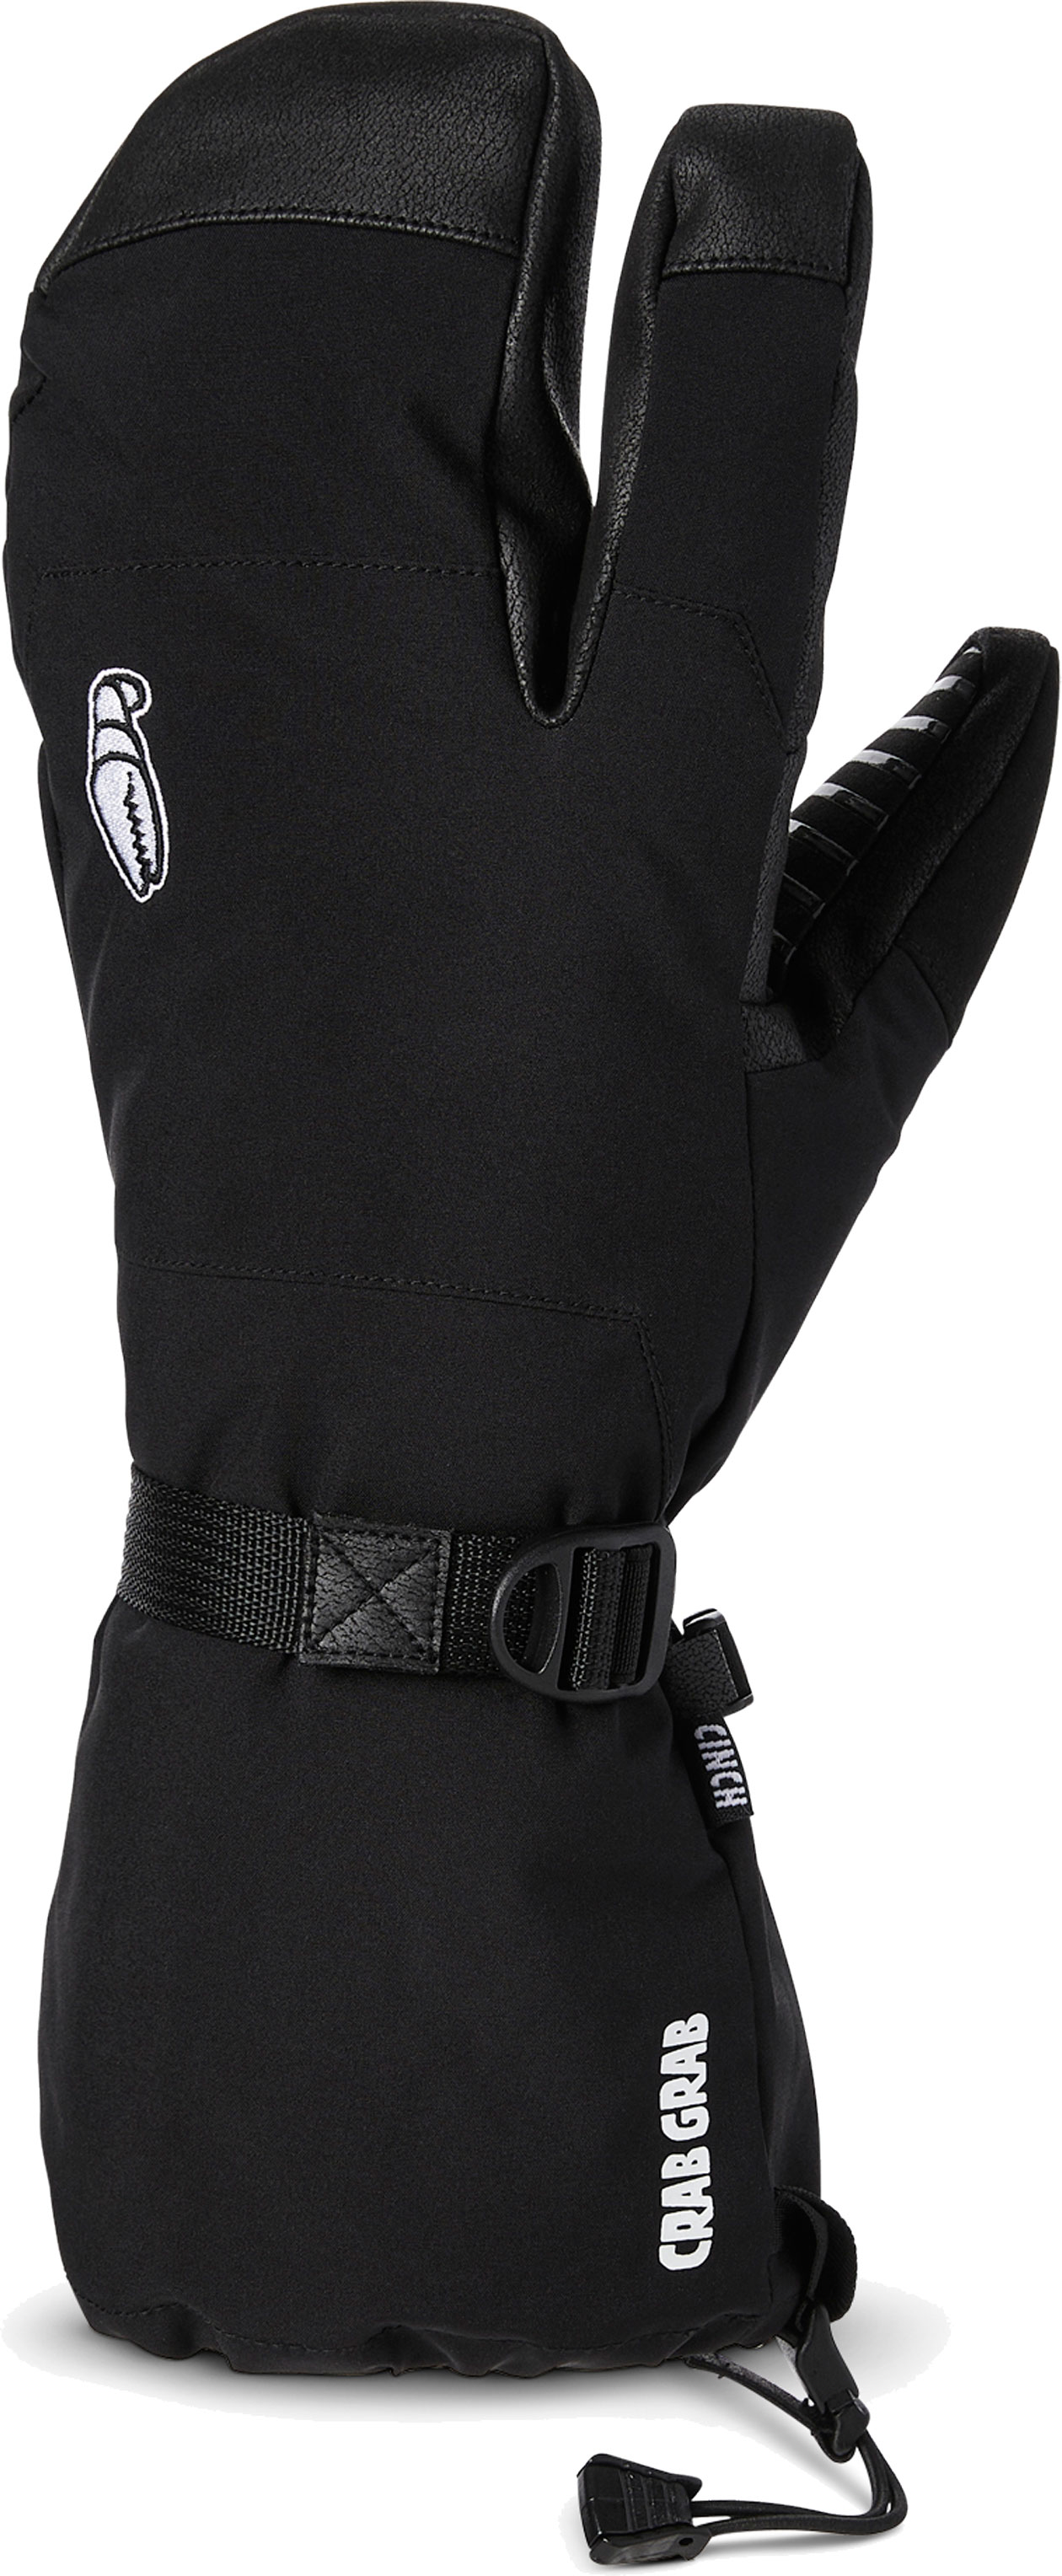 Crab Grab Cinch Trigger Gloves  UK Stock, Shipped from Cornwall.